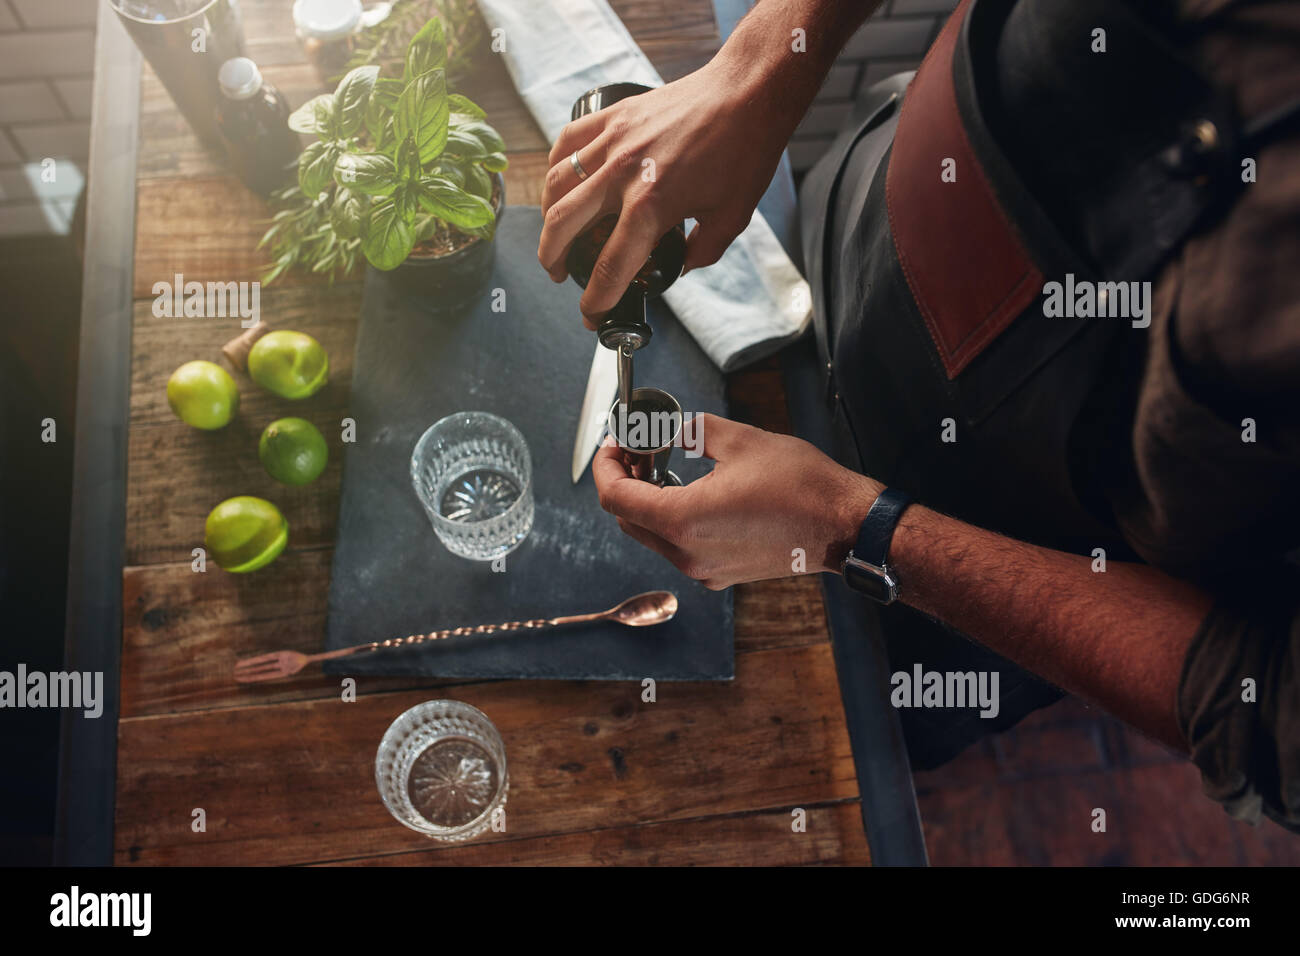 Close up of barman hands pouring alcoholic drink in to a jigger to prepare a cocktail, with basil leaves and lemons on the bar c Stock Photo